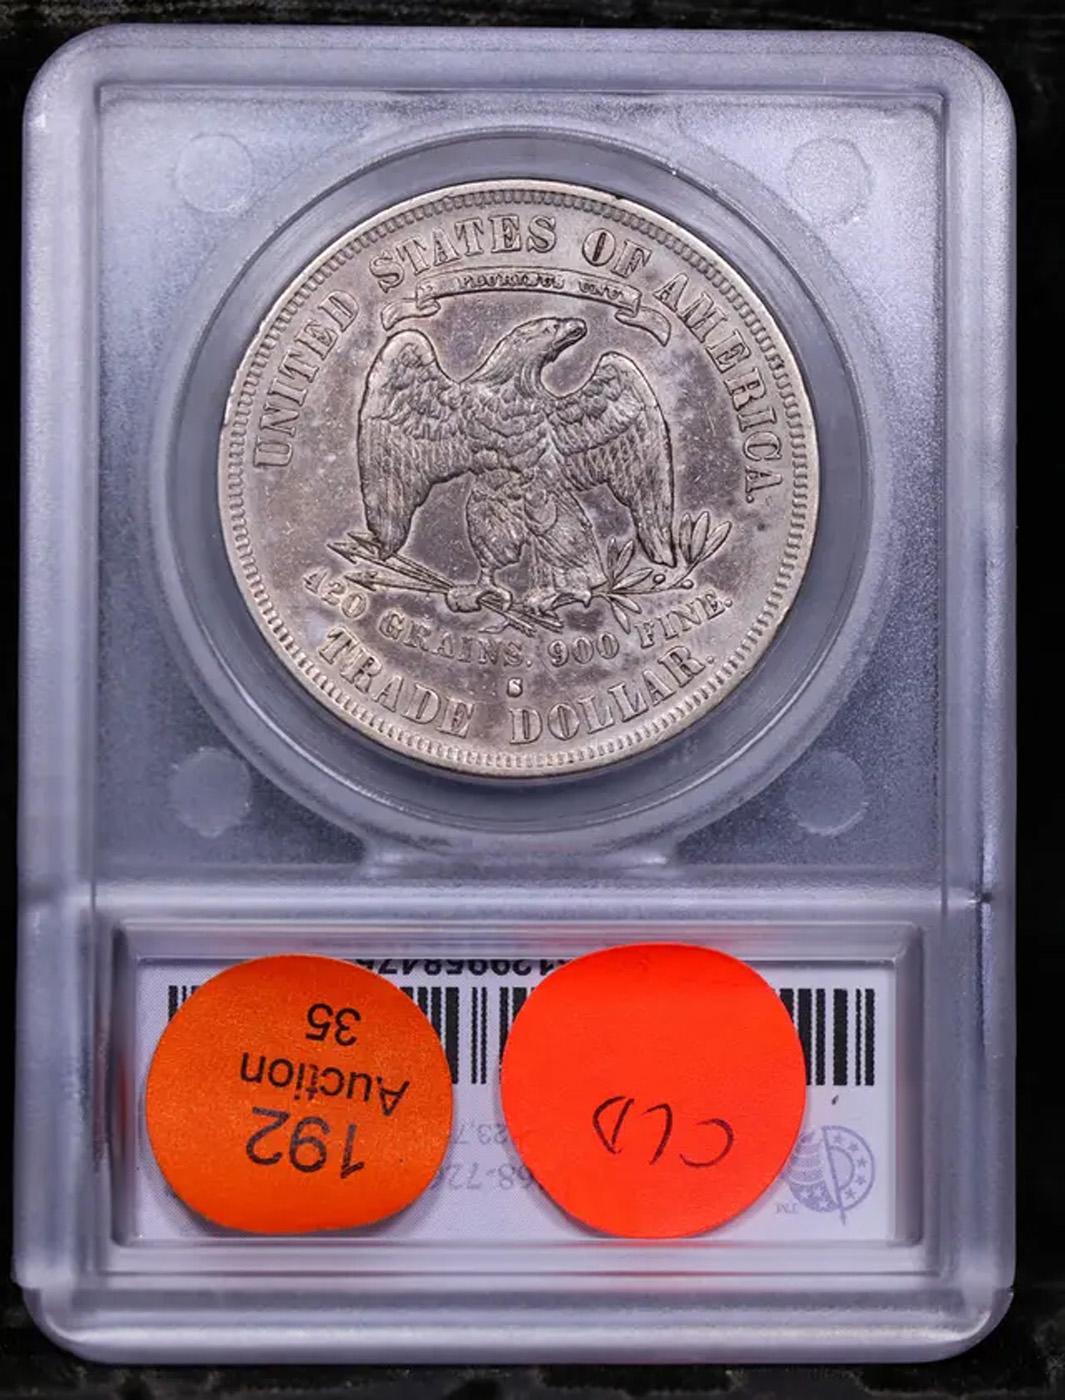 ***Auction Highlight*** 1878-s Trade Dollar 1 Graded au53 By SEGS (fc)